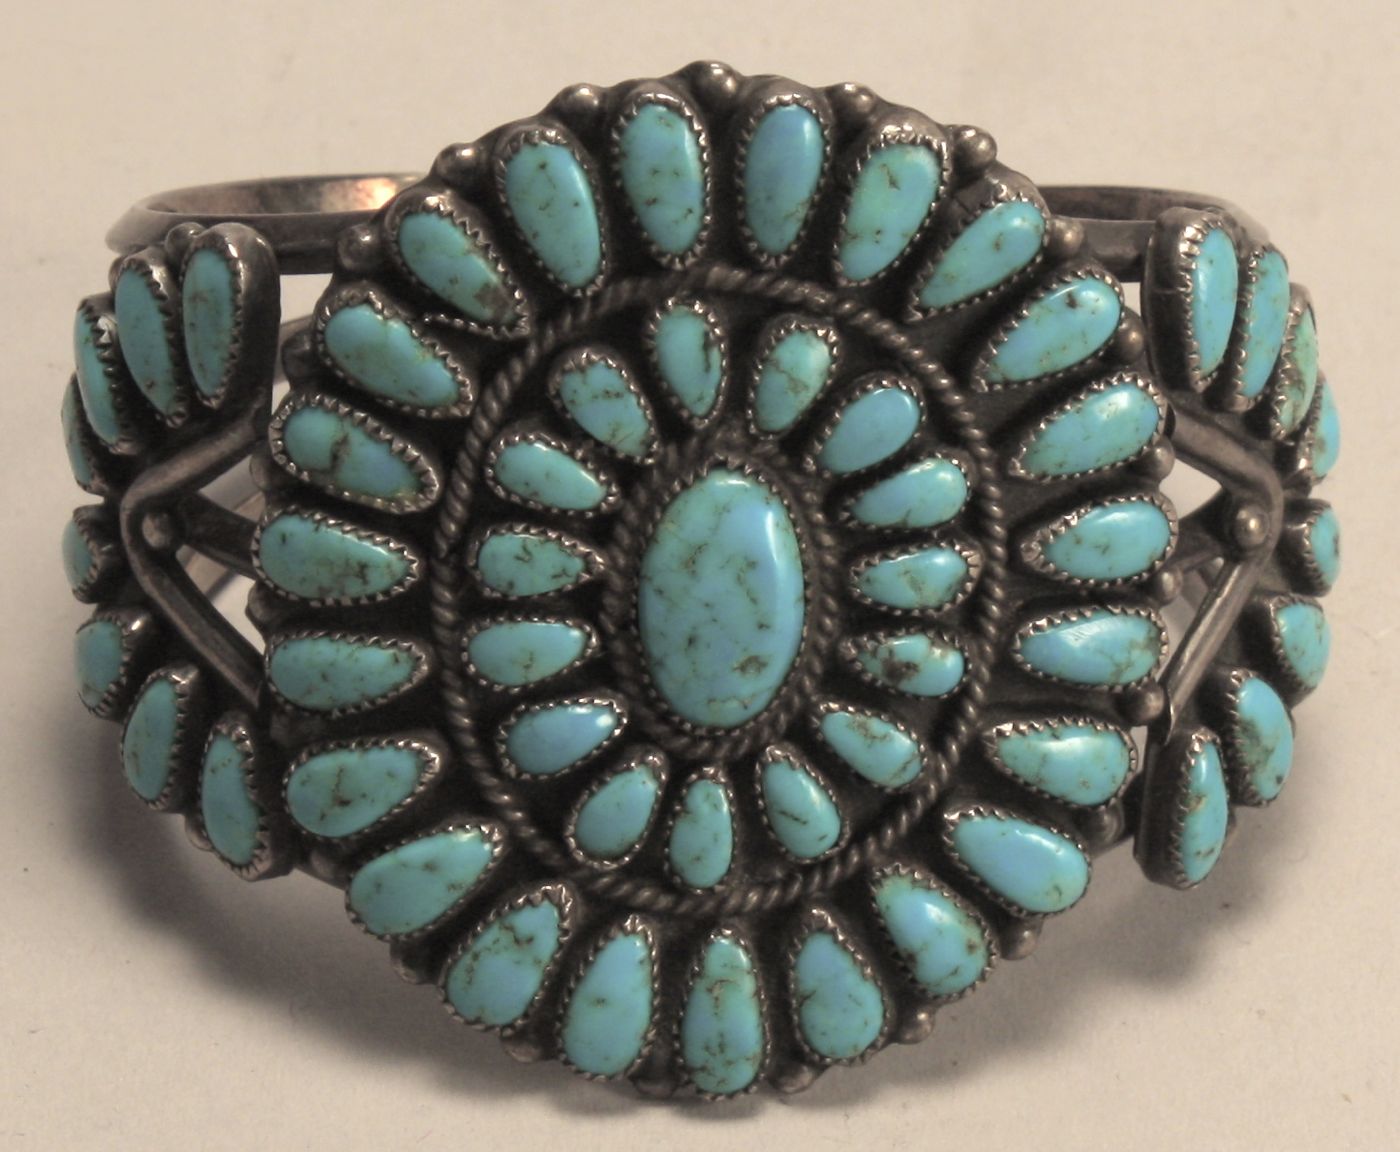 NAVAJO SILVER AND TURQUOISE CUFF BRACELETBy